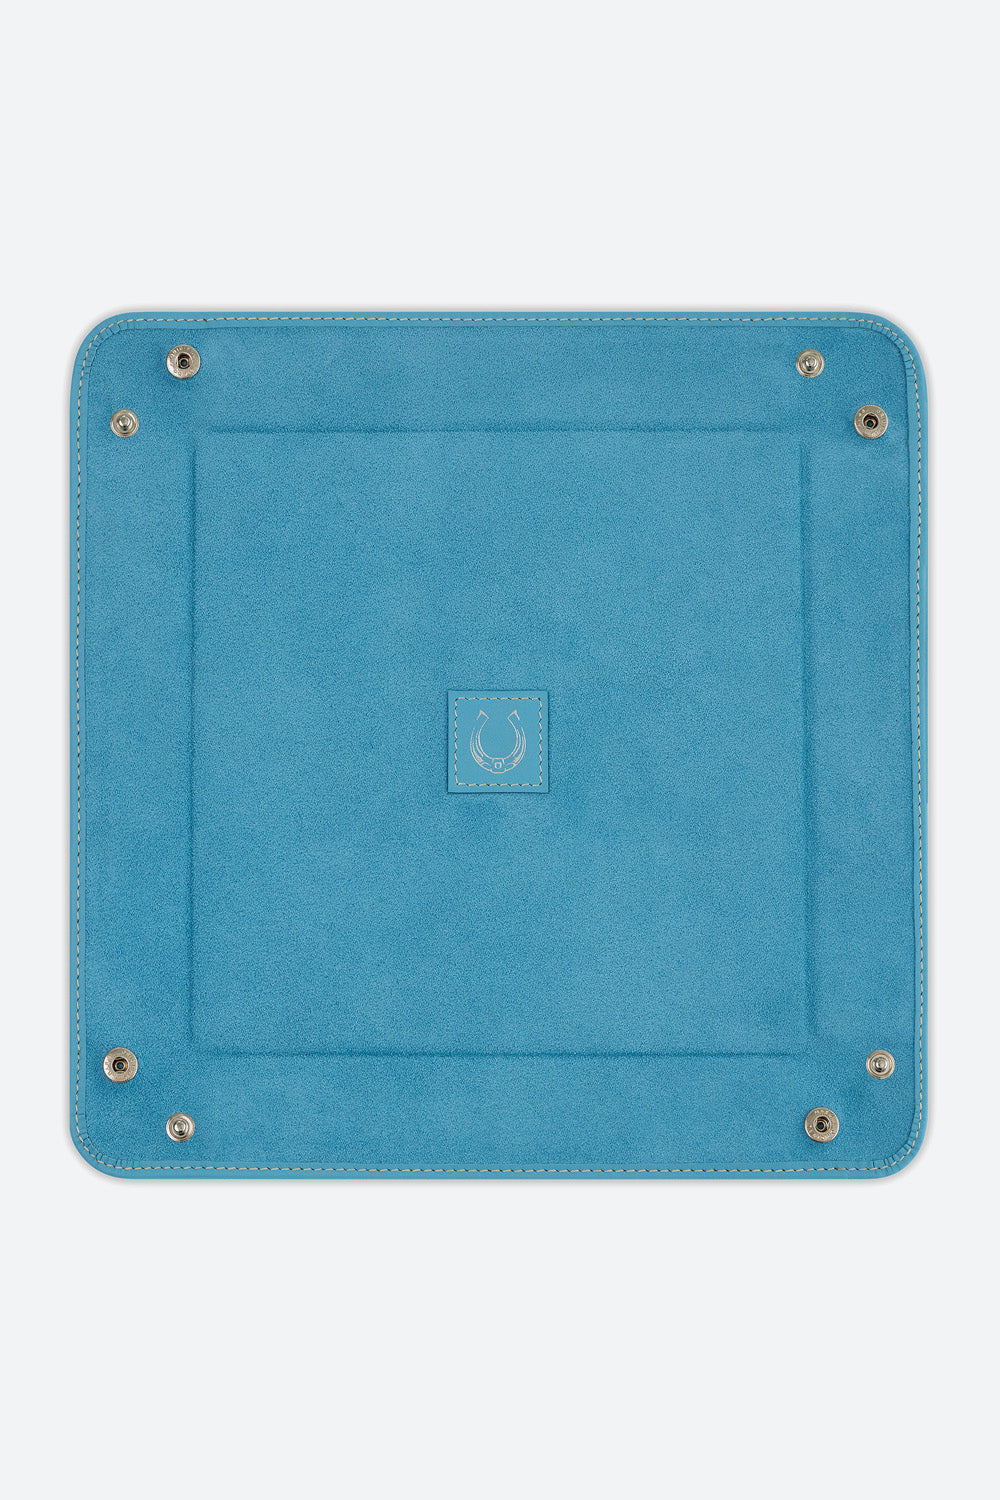 Large Square Leather Valet Tray in Light Blue